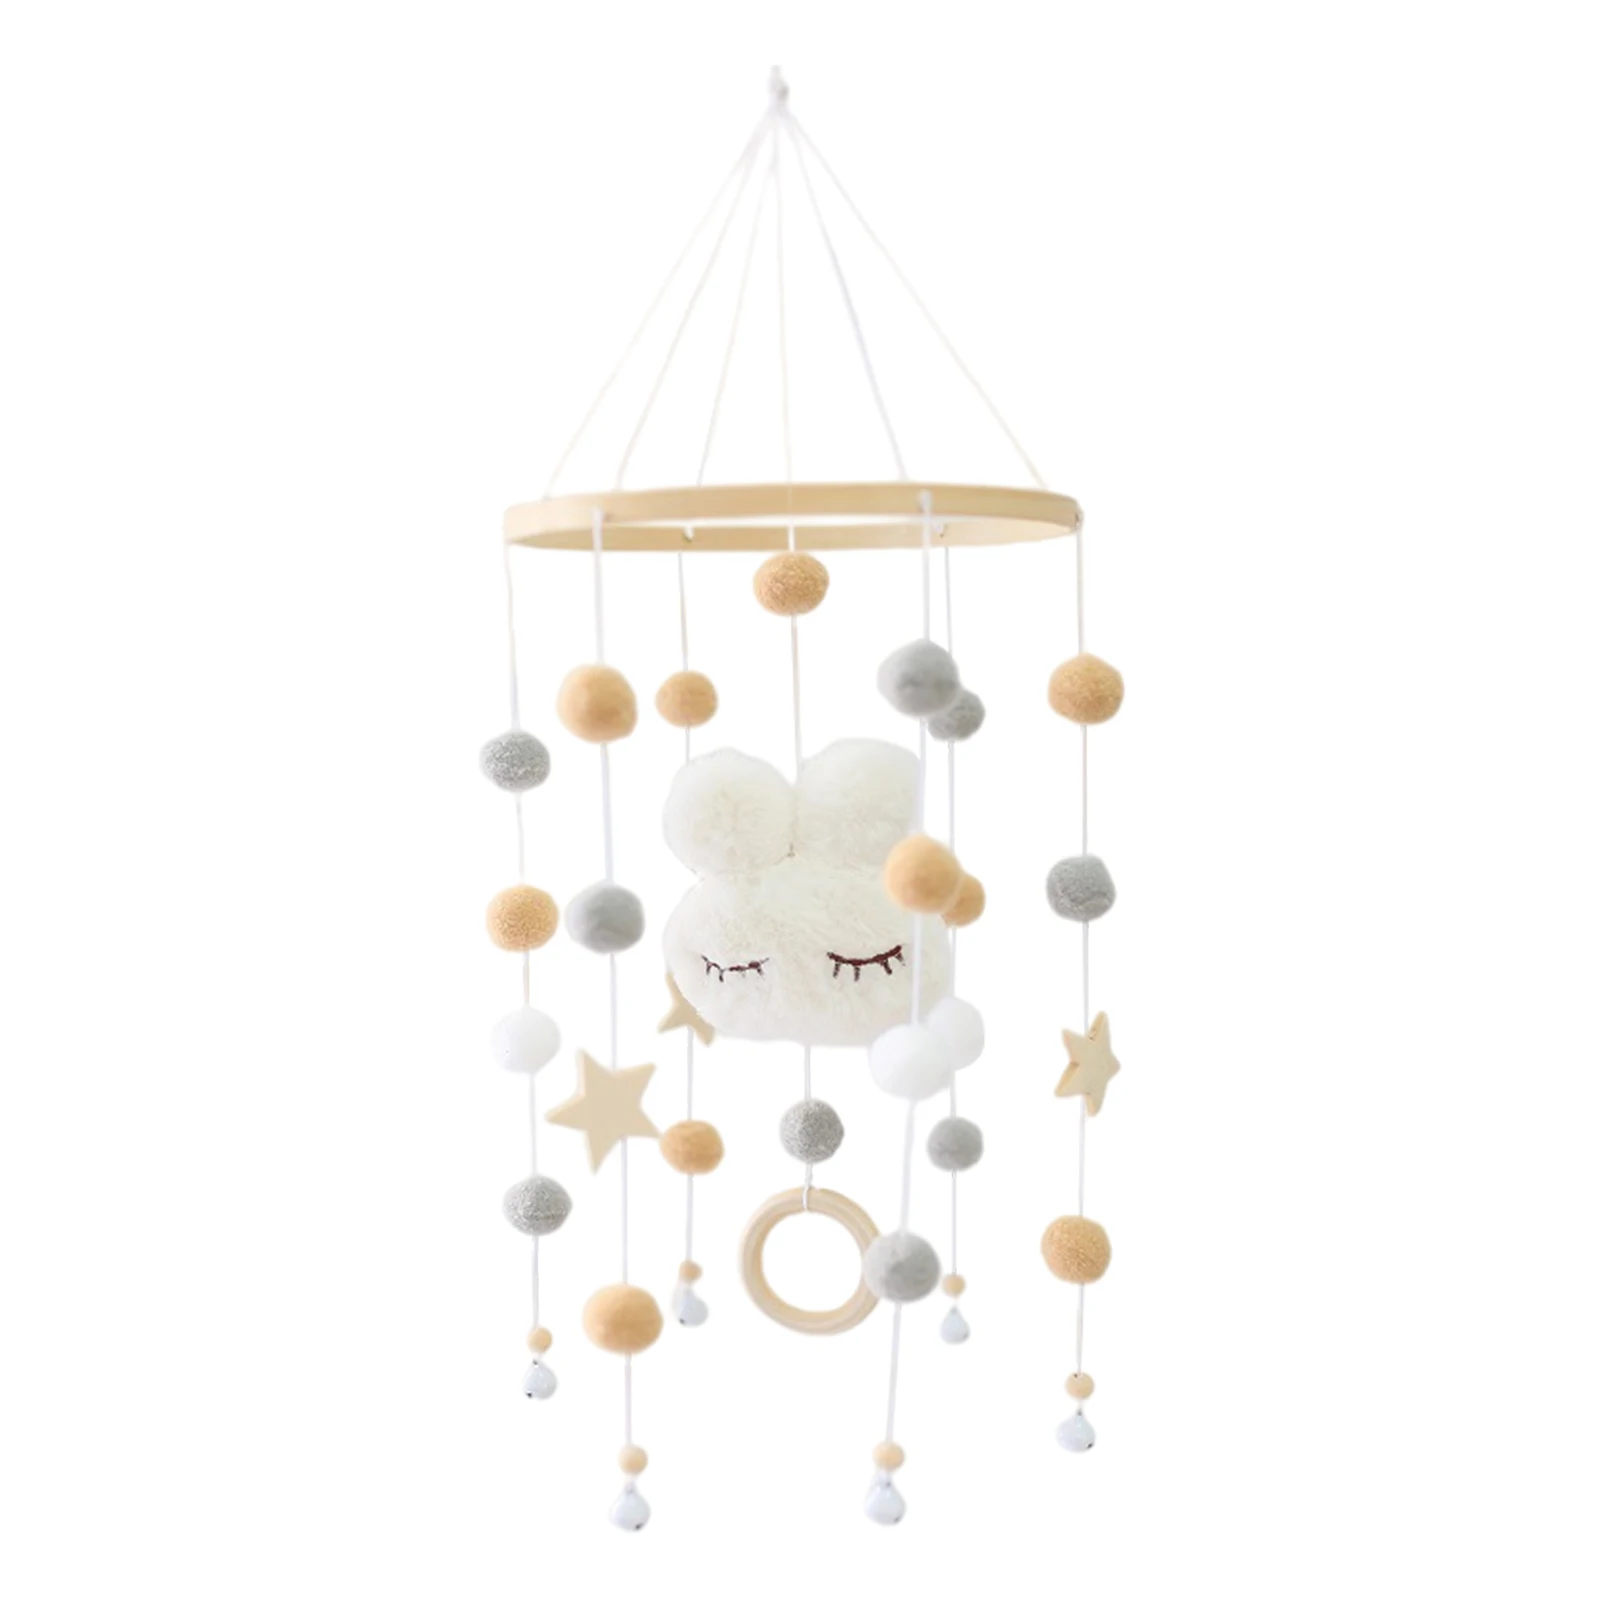 Crib Mobile Bed Bells Baby Wooden Crib Mobile Ceiling Mobile with Colorful Felt Balls and Bunny for Bassinet Nursery Crib Bedroo